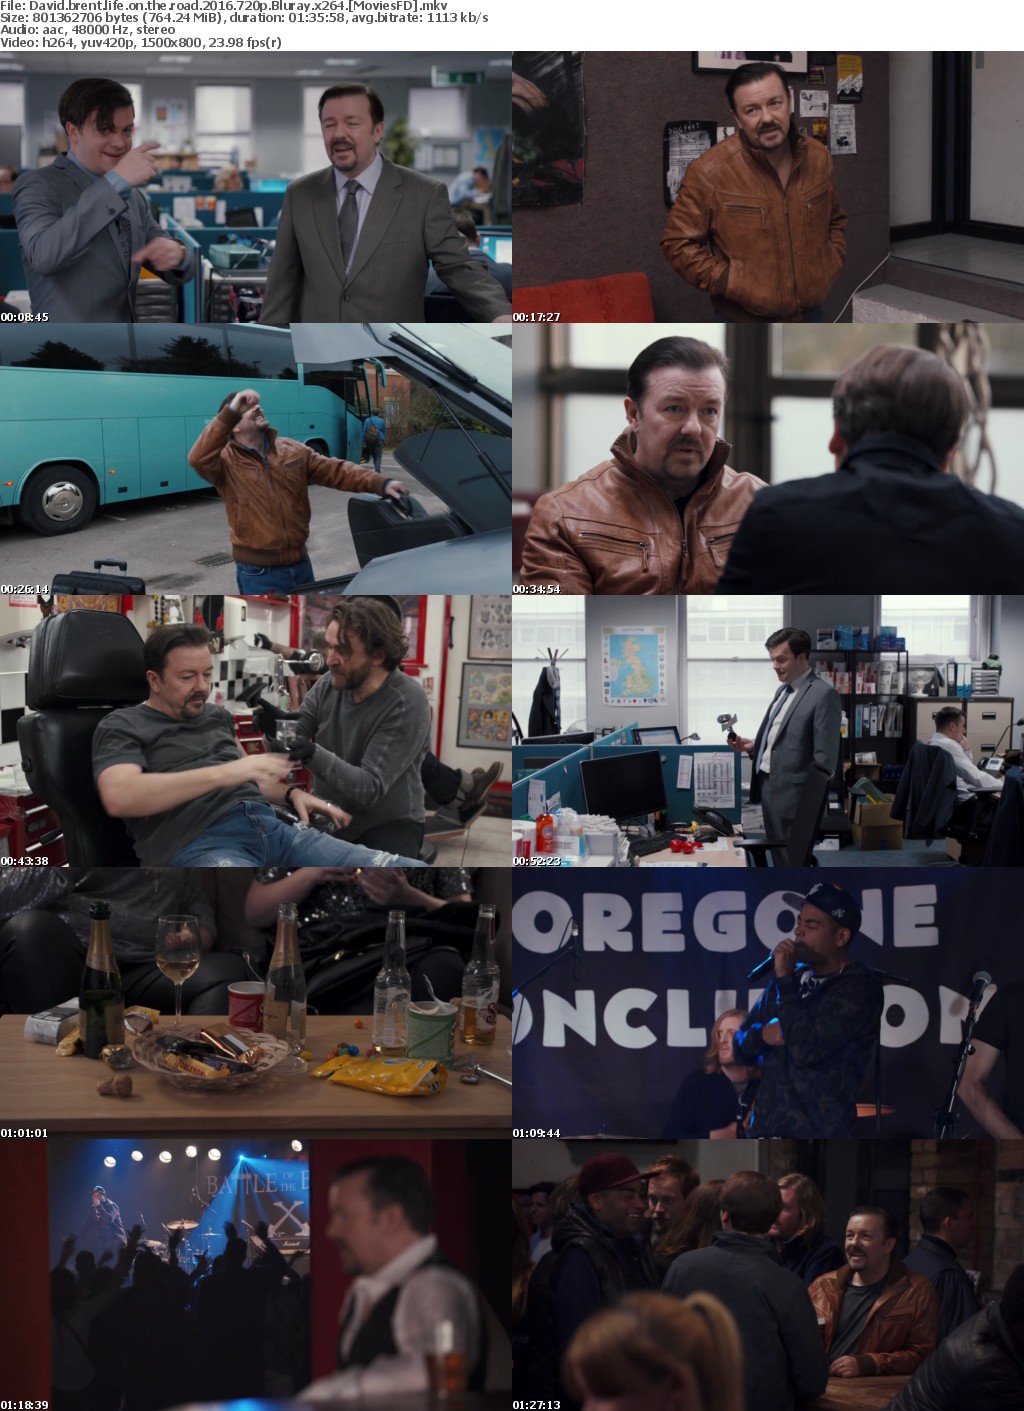 David Brent Life on the Road (2016) 720p BluRay x264 - MoviesFD